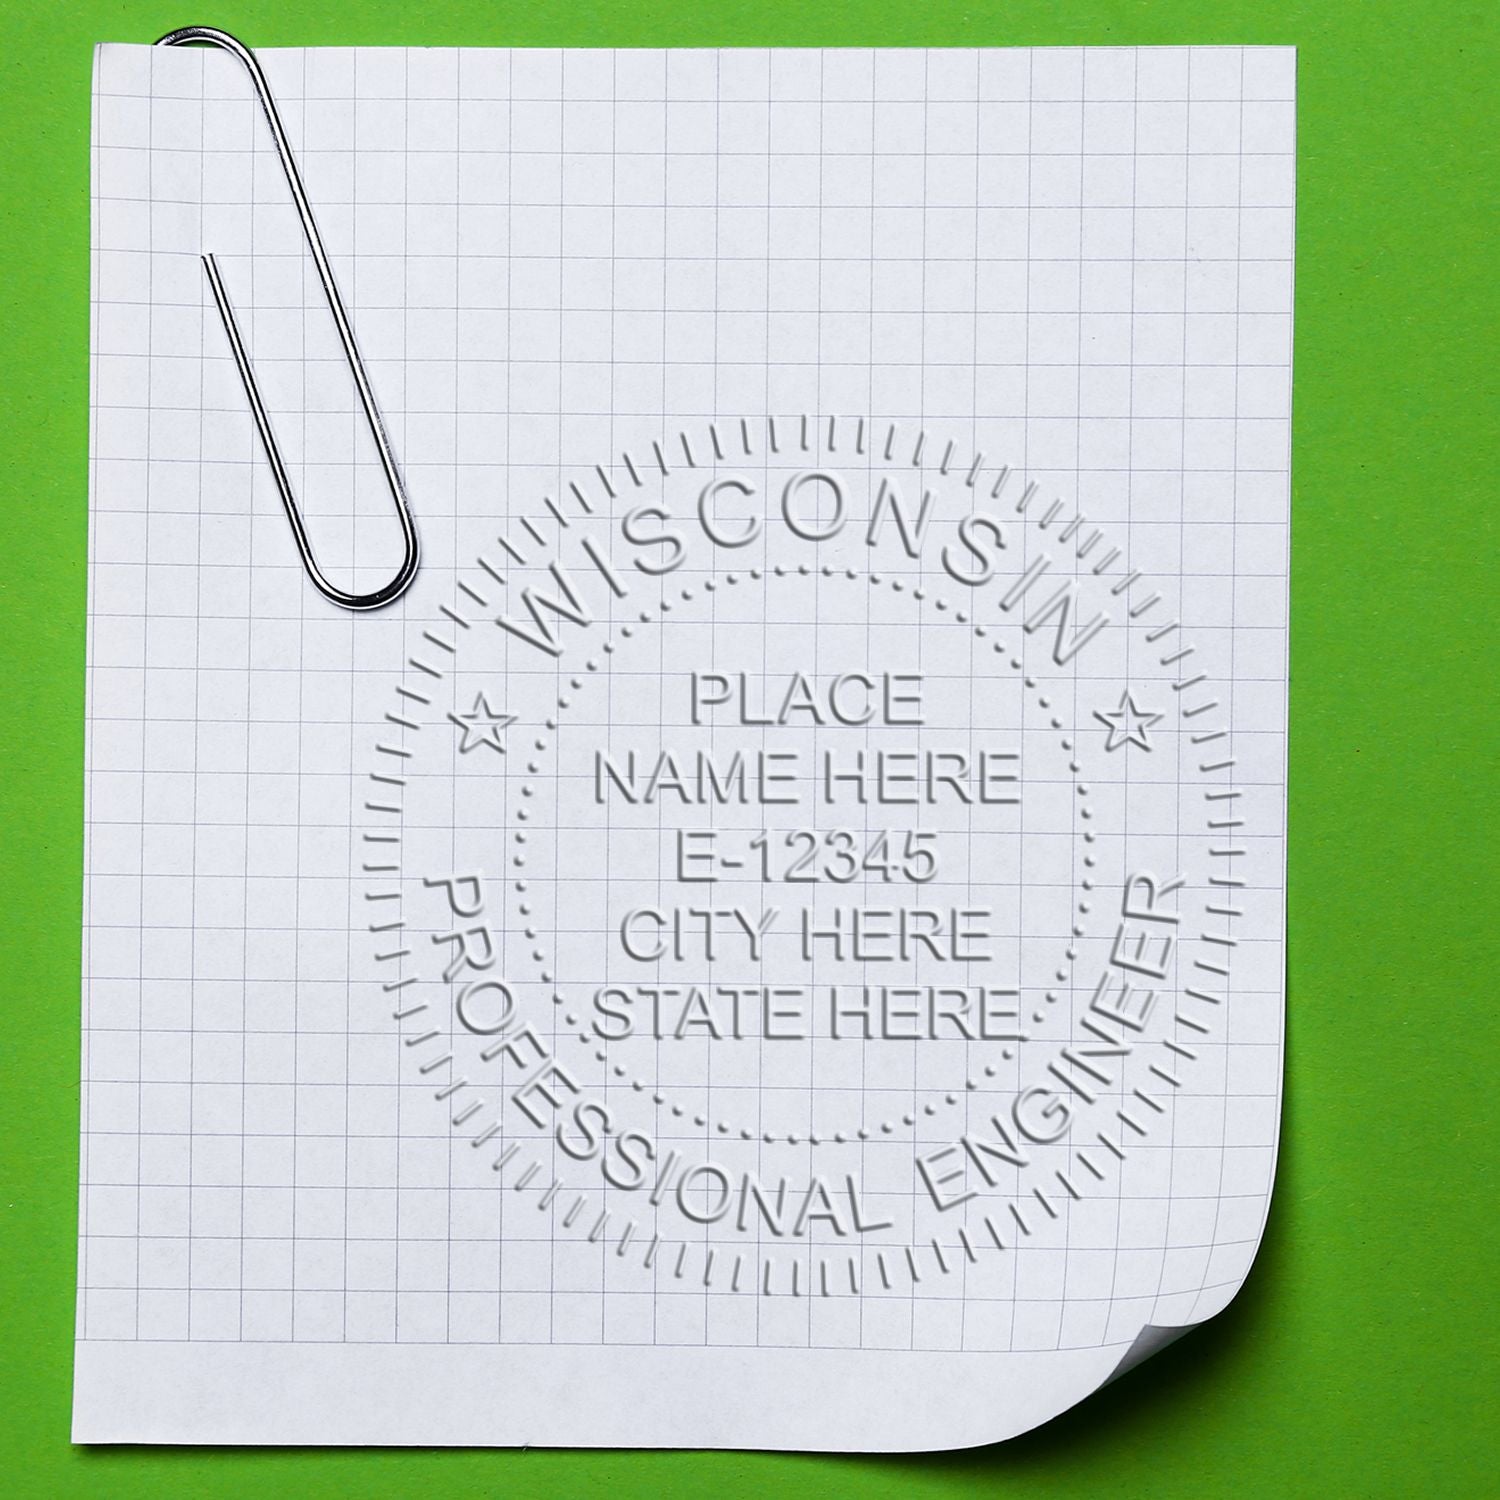 The Handheld Wisconsin Professional Engineer Embosser stamp impression comes to life with a crisp, detailed photo on paper - showcasing true professional quality.